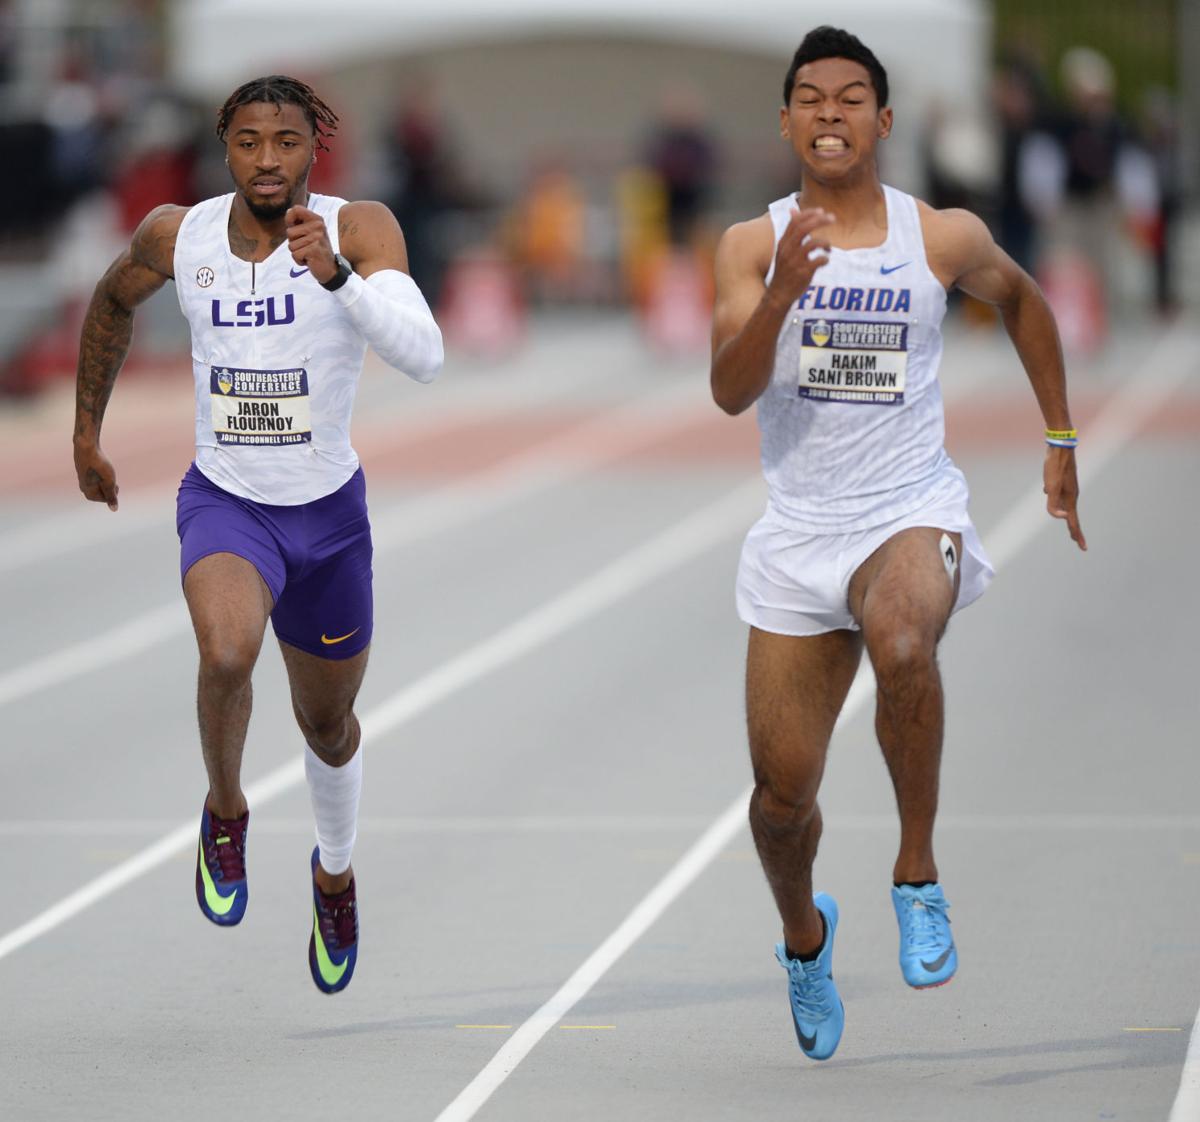 For first time in nearly three decades, LSU men's track and field claims  SEC title | LSU | theadvocate.com